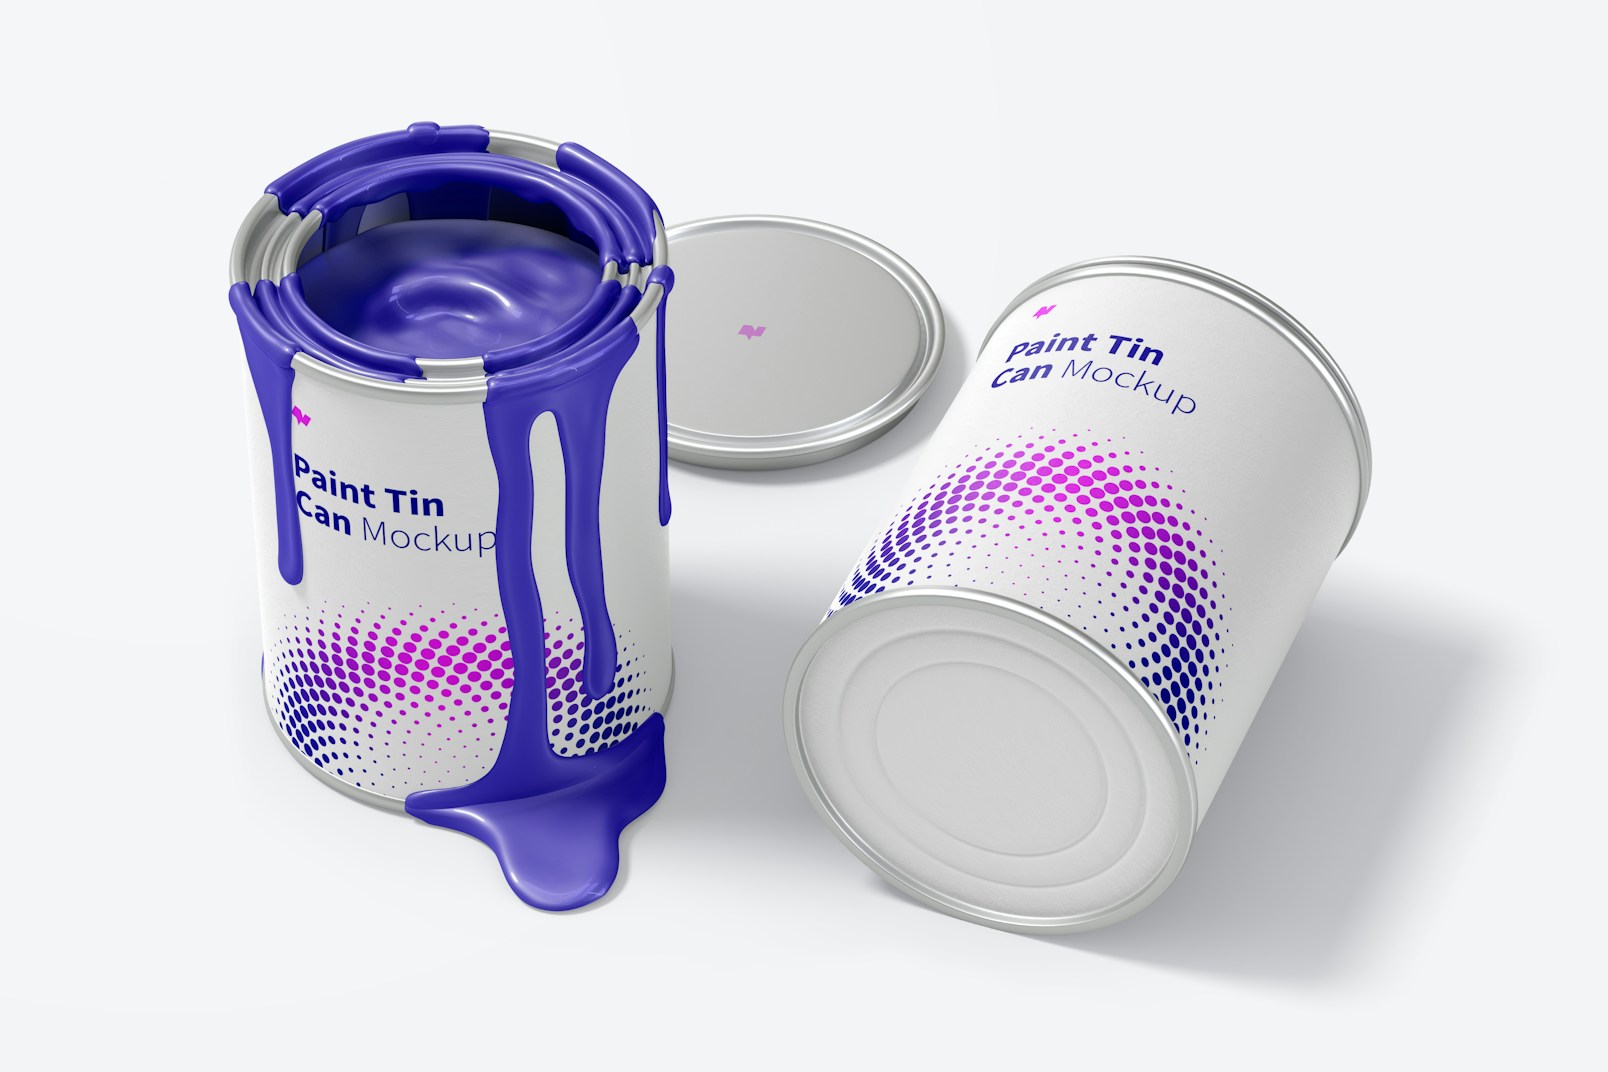 Paint Tin Cans Mockup, Perspective